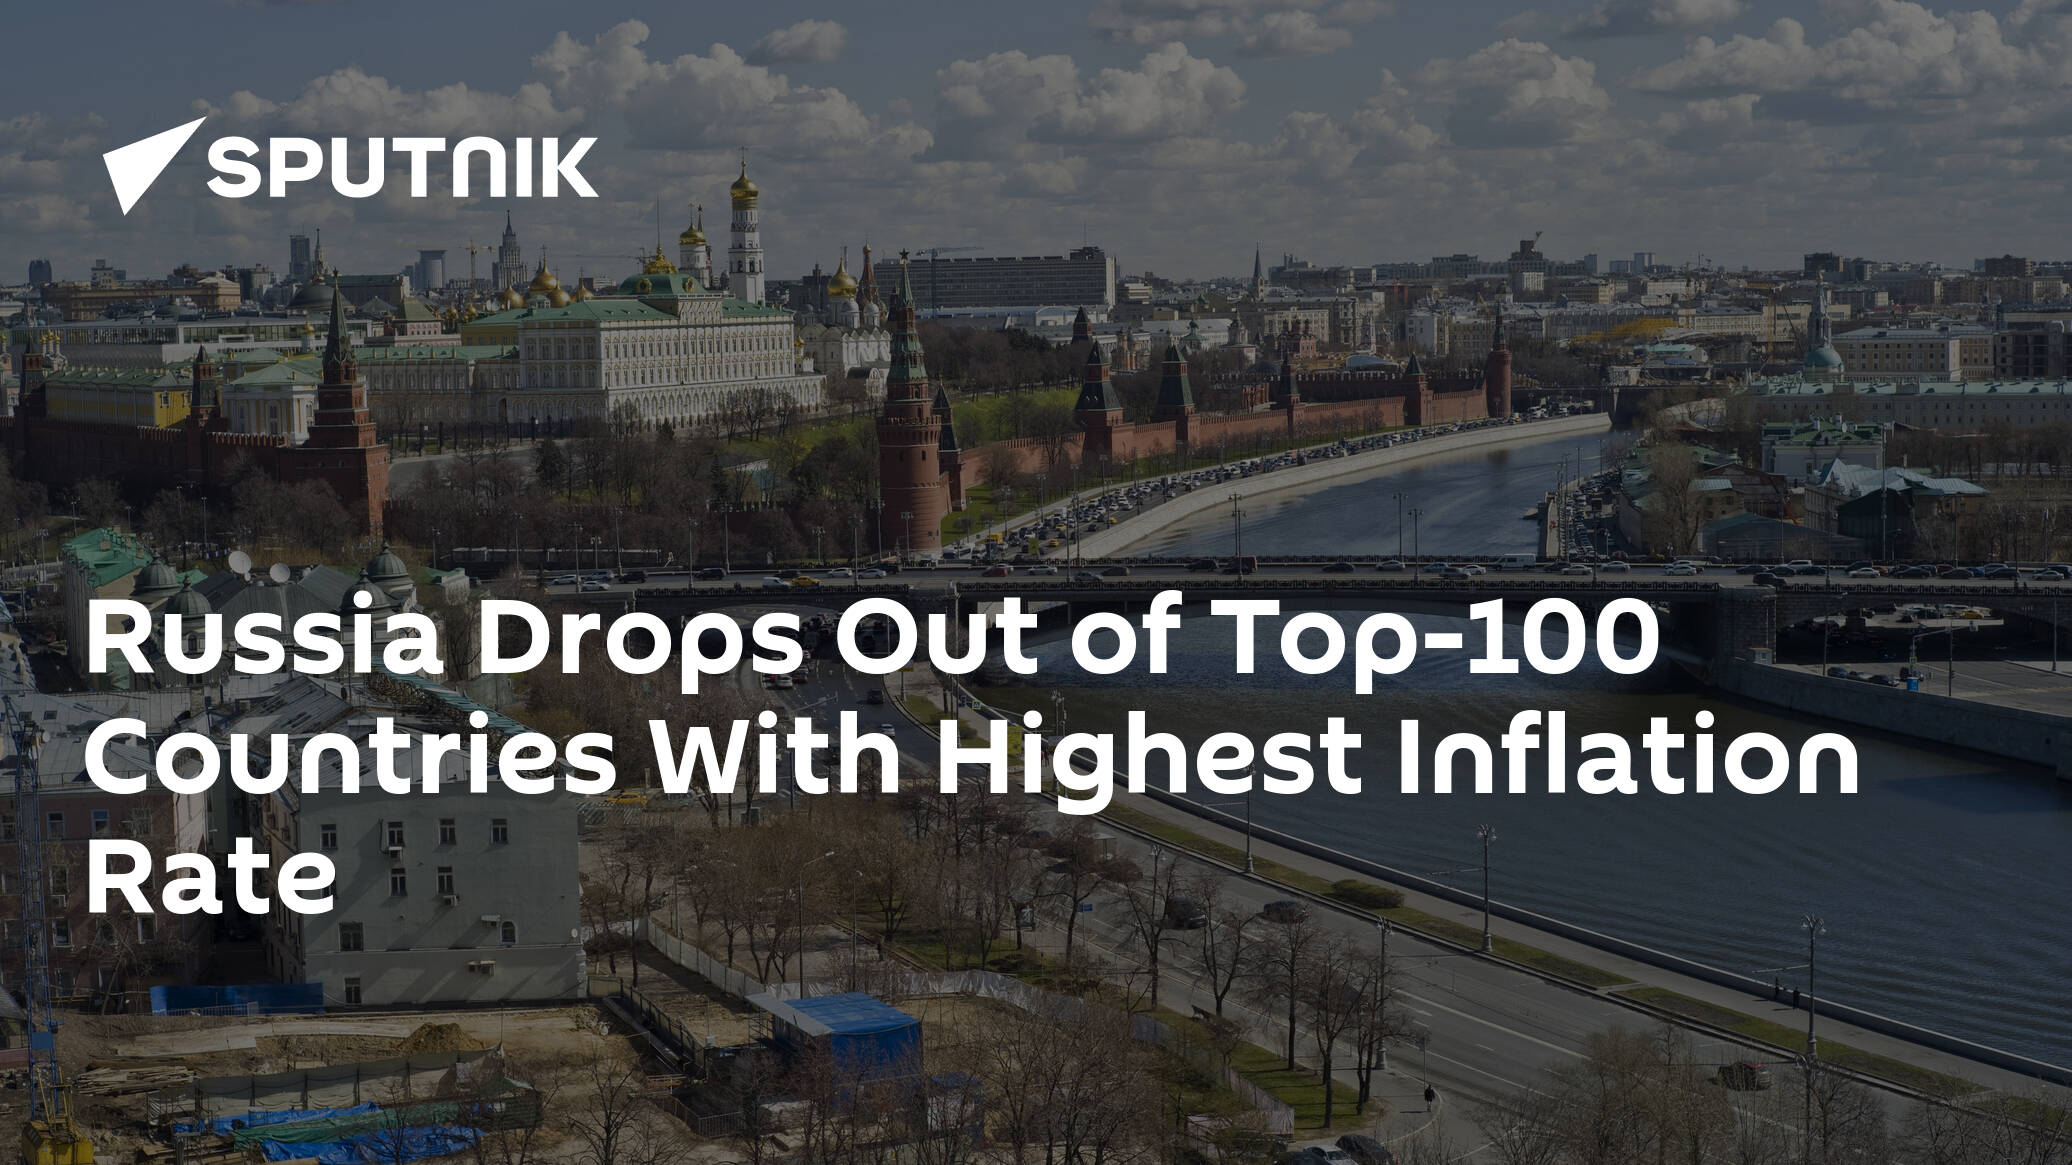 Russia Drops Out of Top-100 Countries With Highest Inflation Rate